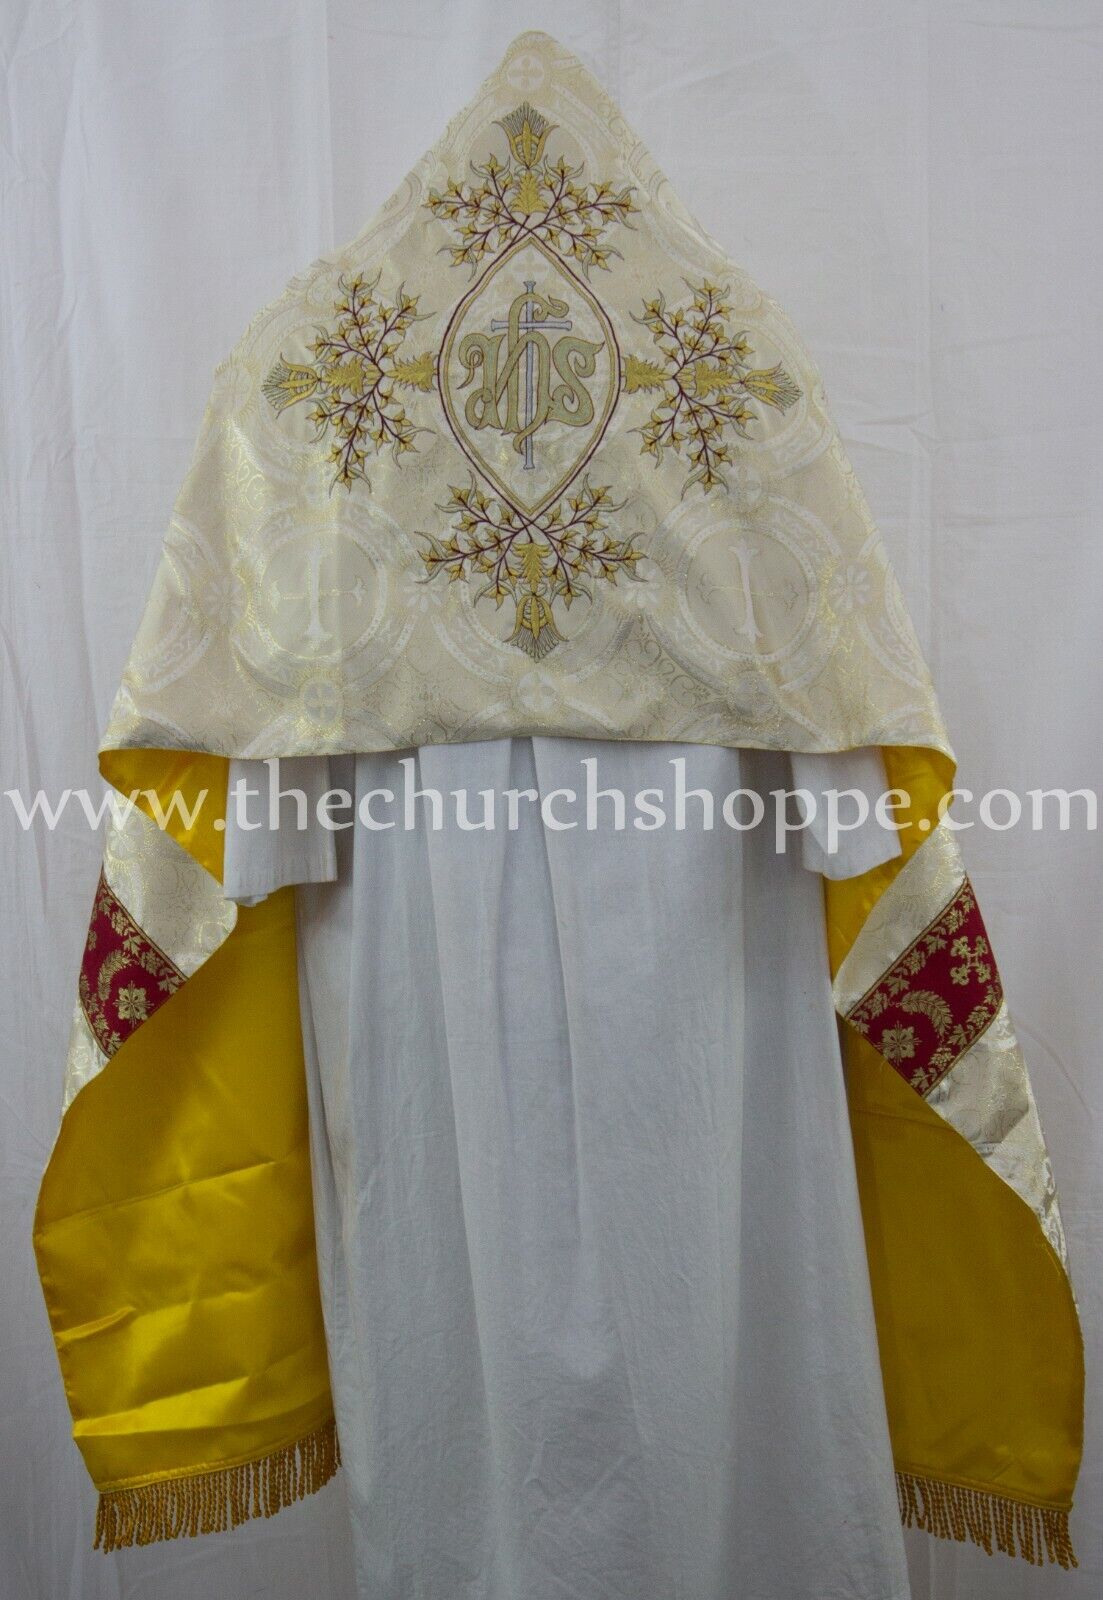 METALLIC GOLD Humeral Veil with IHS embroidery,voile huméral,velo omerale